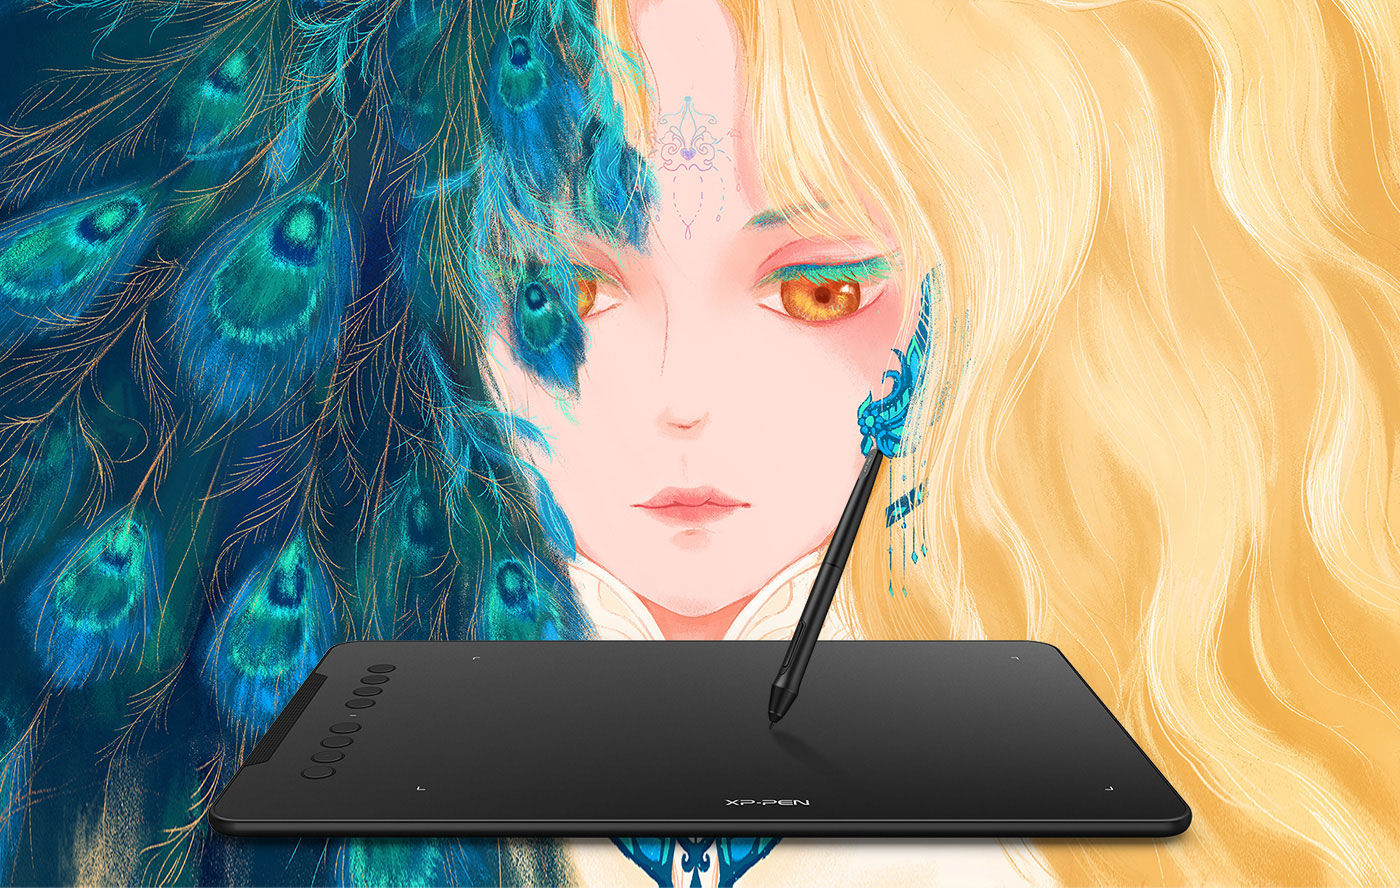 decorate your life by use XP-Pen Deco 01 V2 graphic drawing tablet